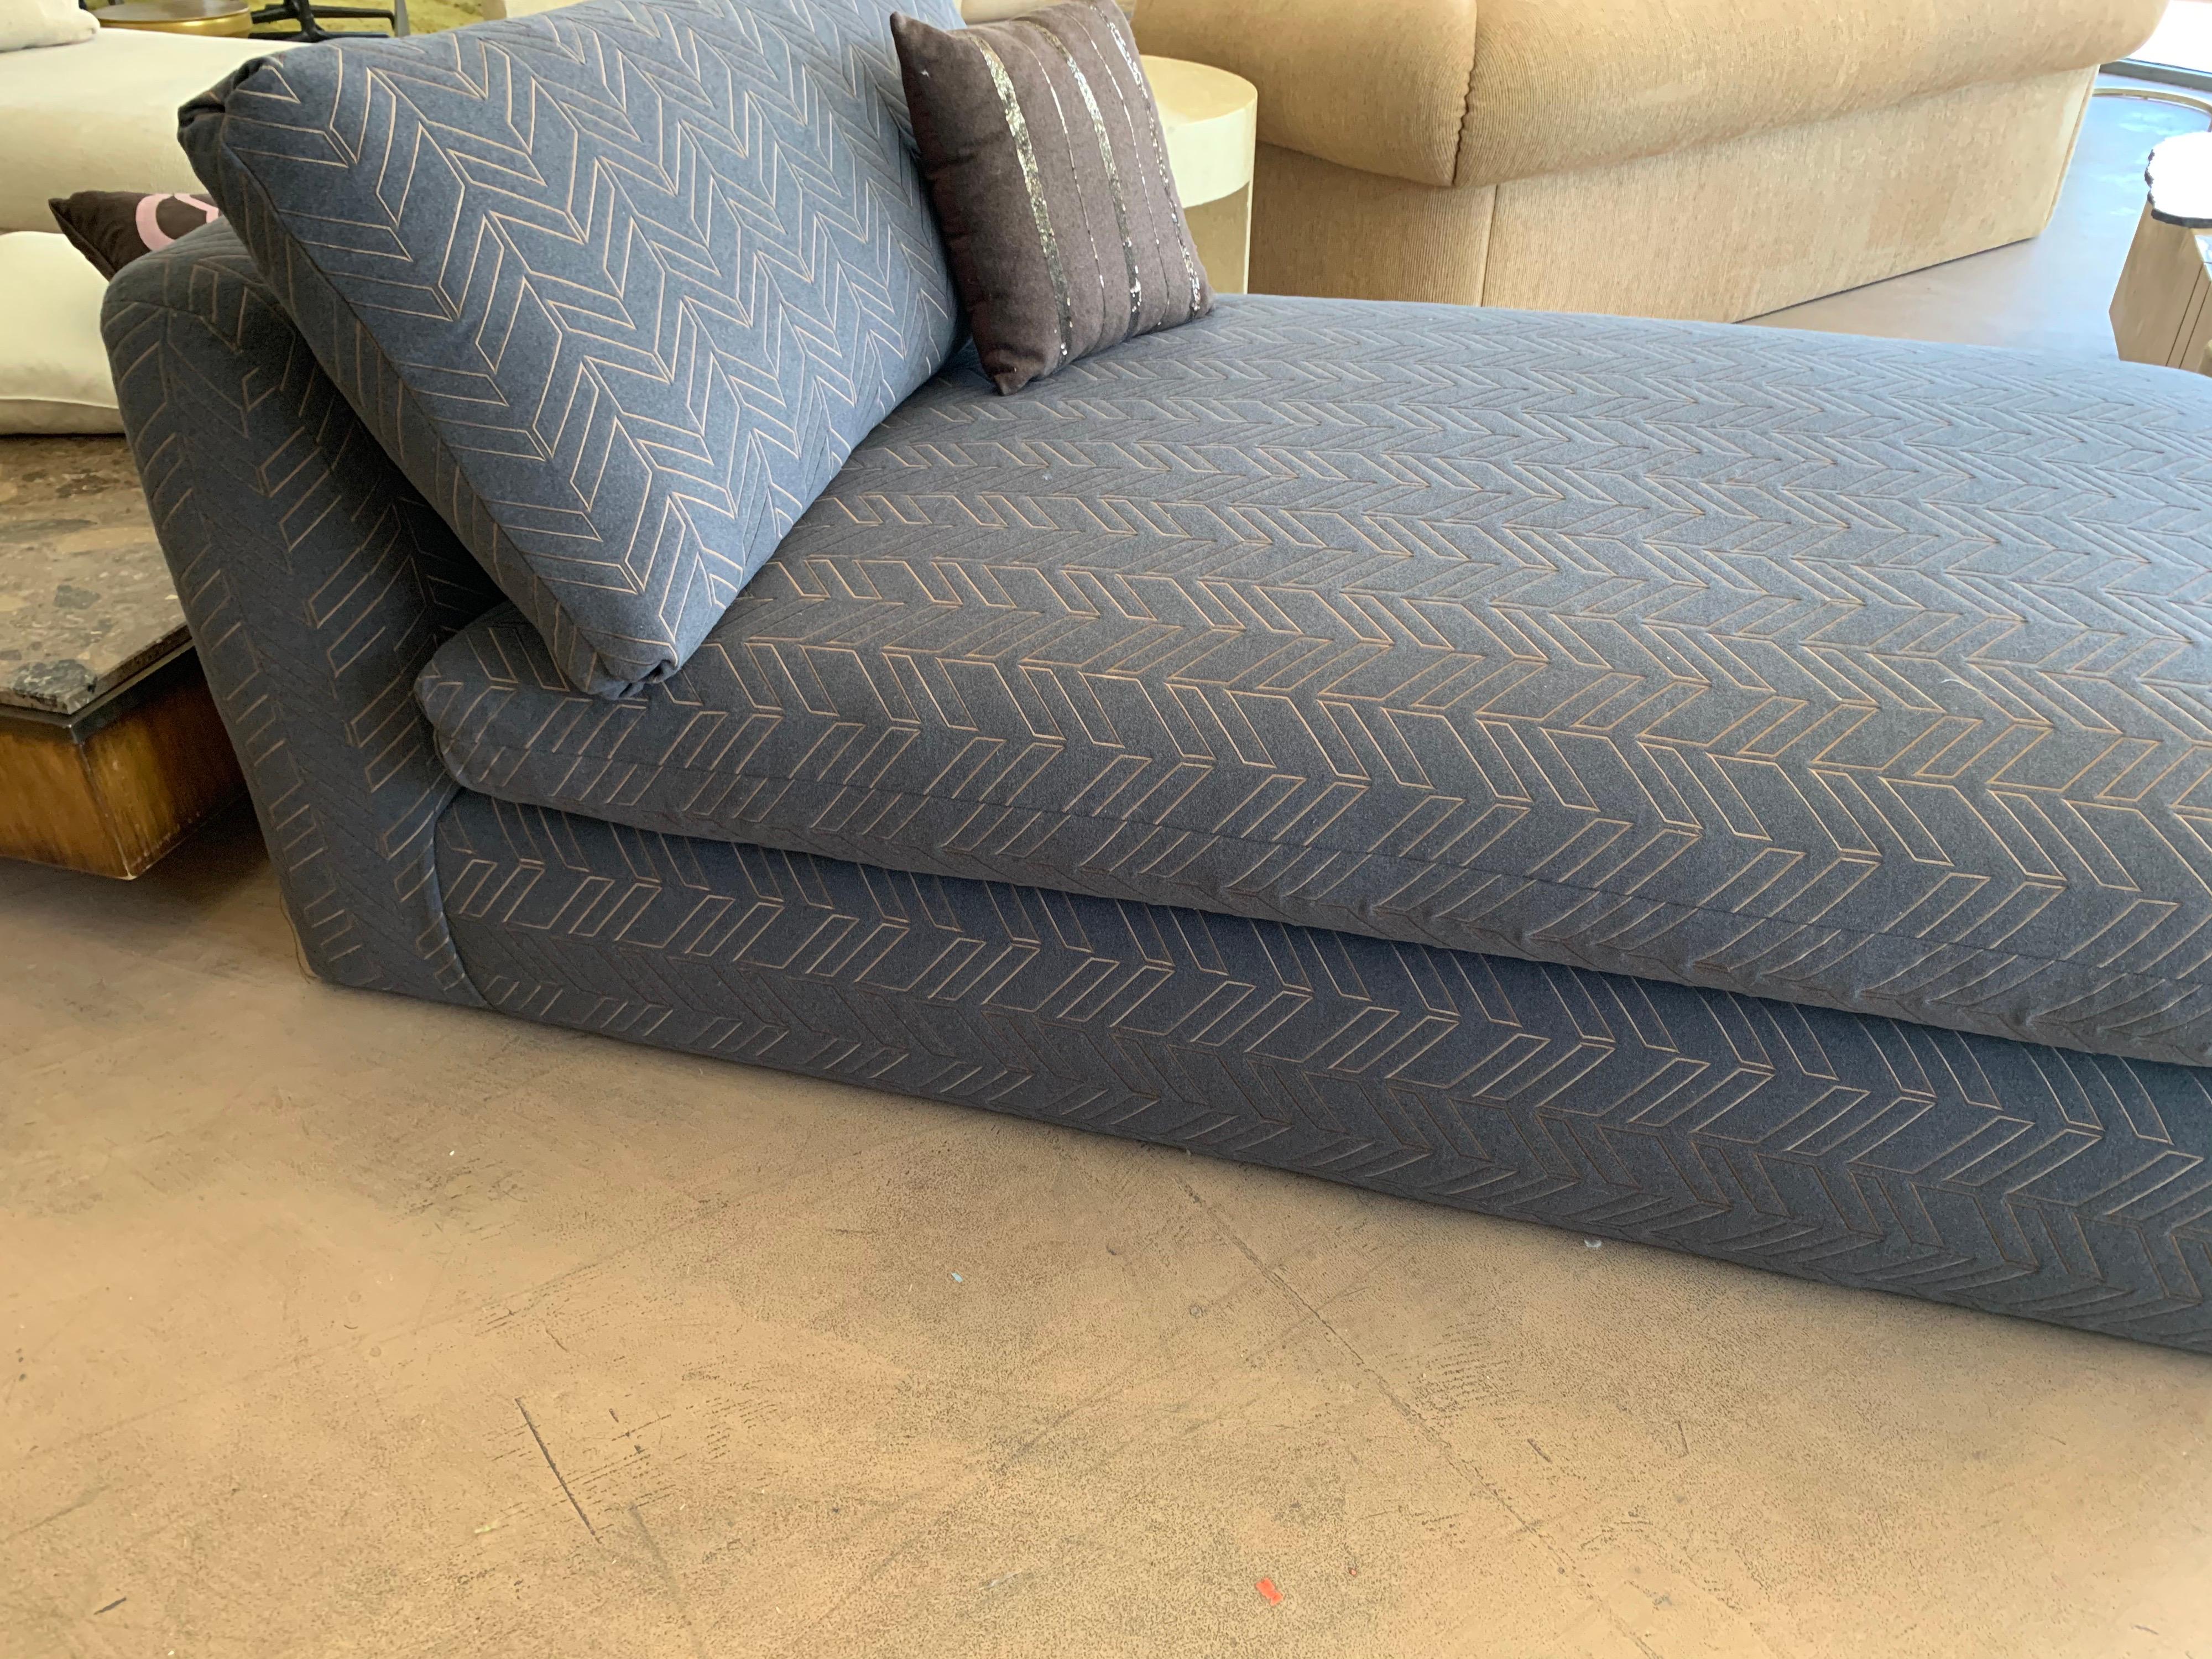 Embroidered Steve Chase Grey & Bronze Modern Chaise Lounge from the Palm Springs Kroc Estate